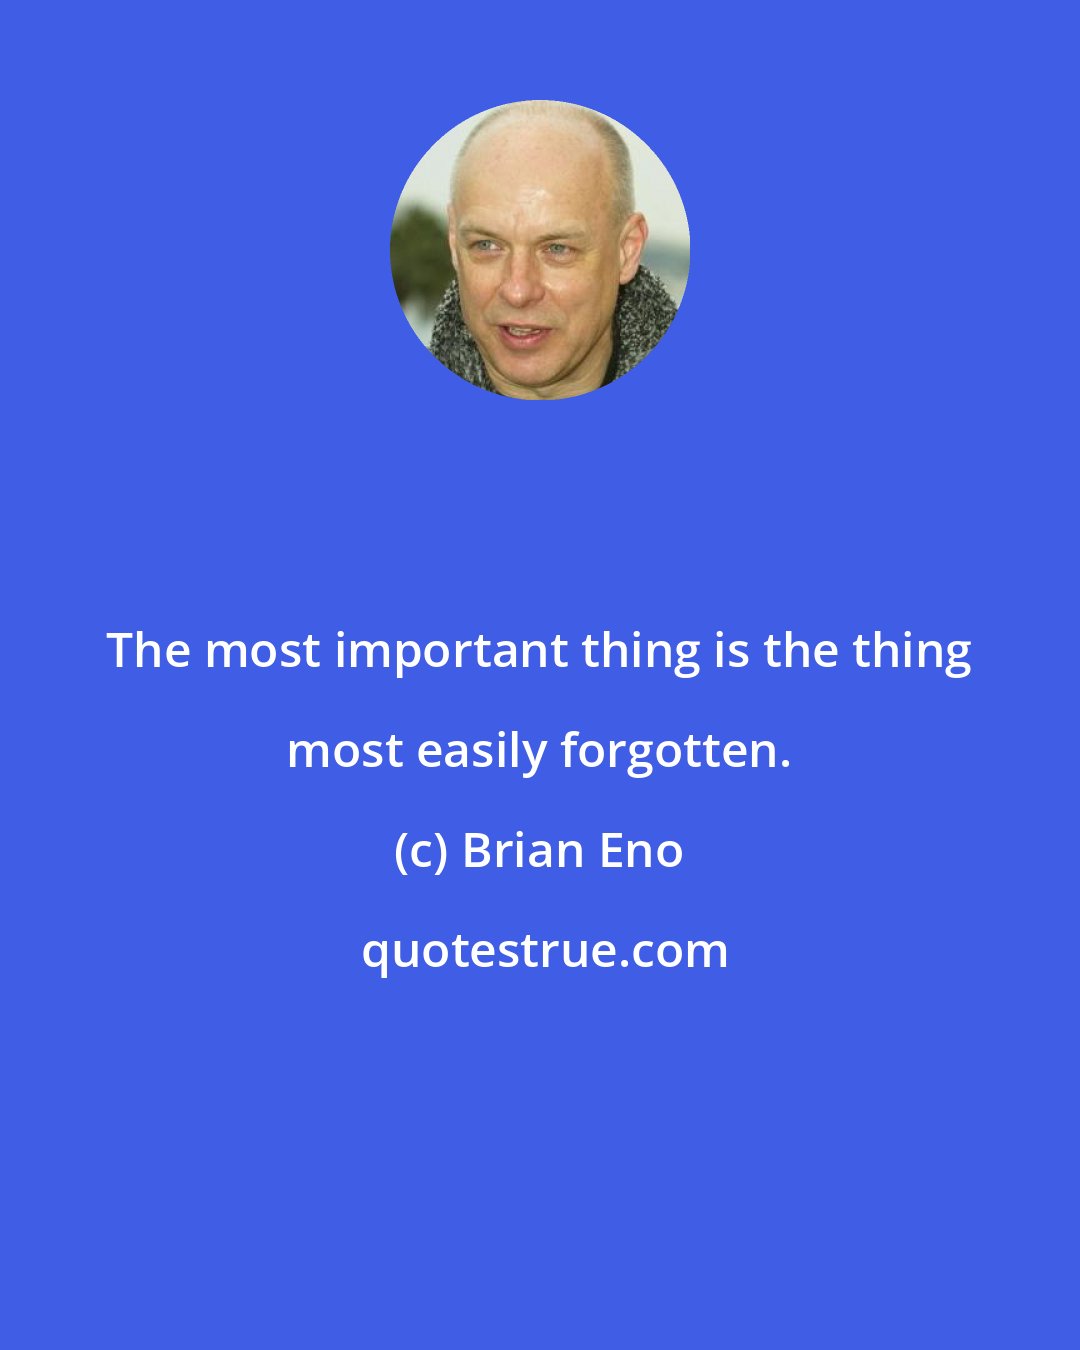 Brian Eno: The most important thing is the thing most easily forgotten.